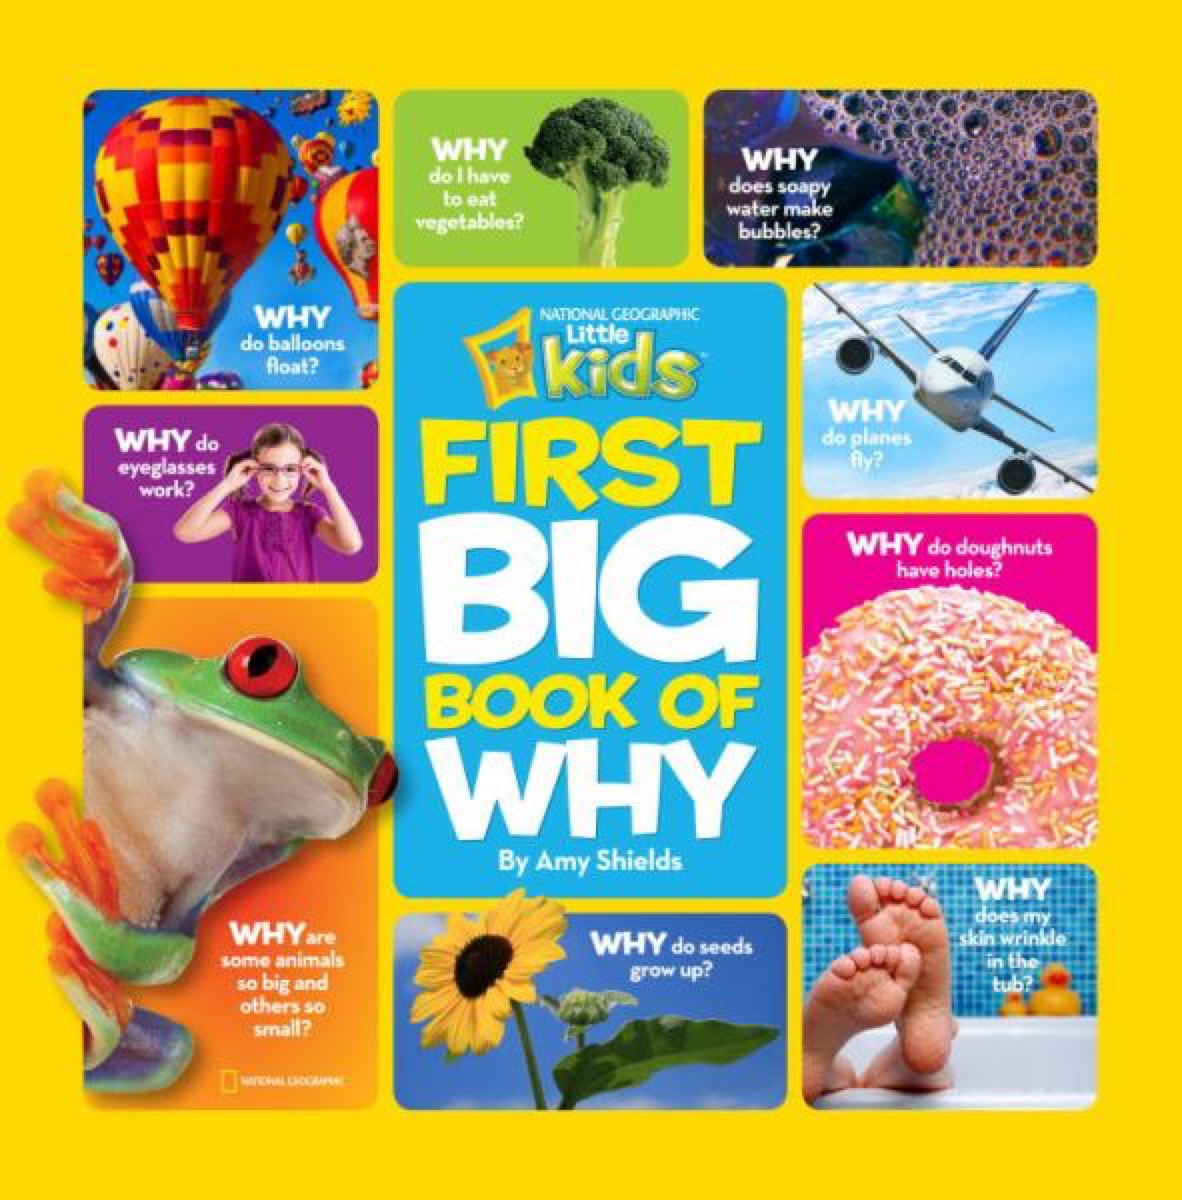 Book cover: "Kids first big book of why"